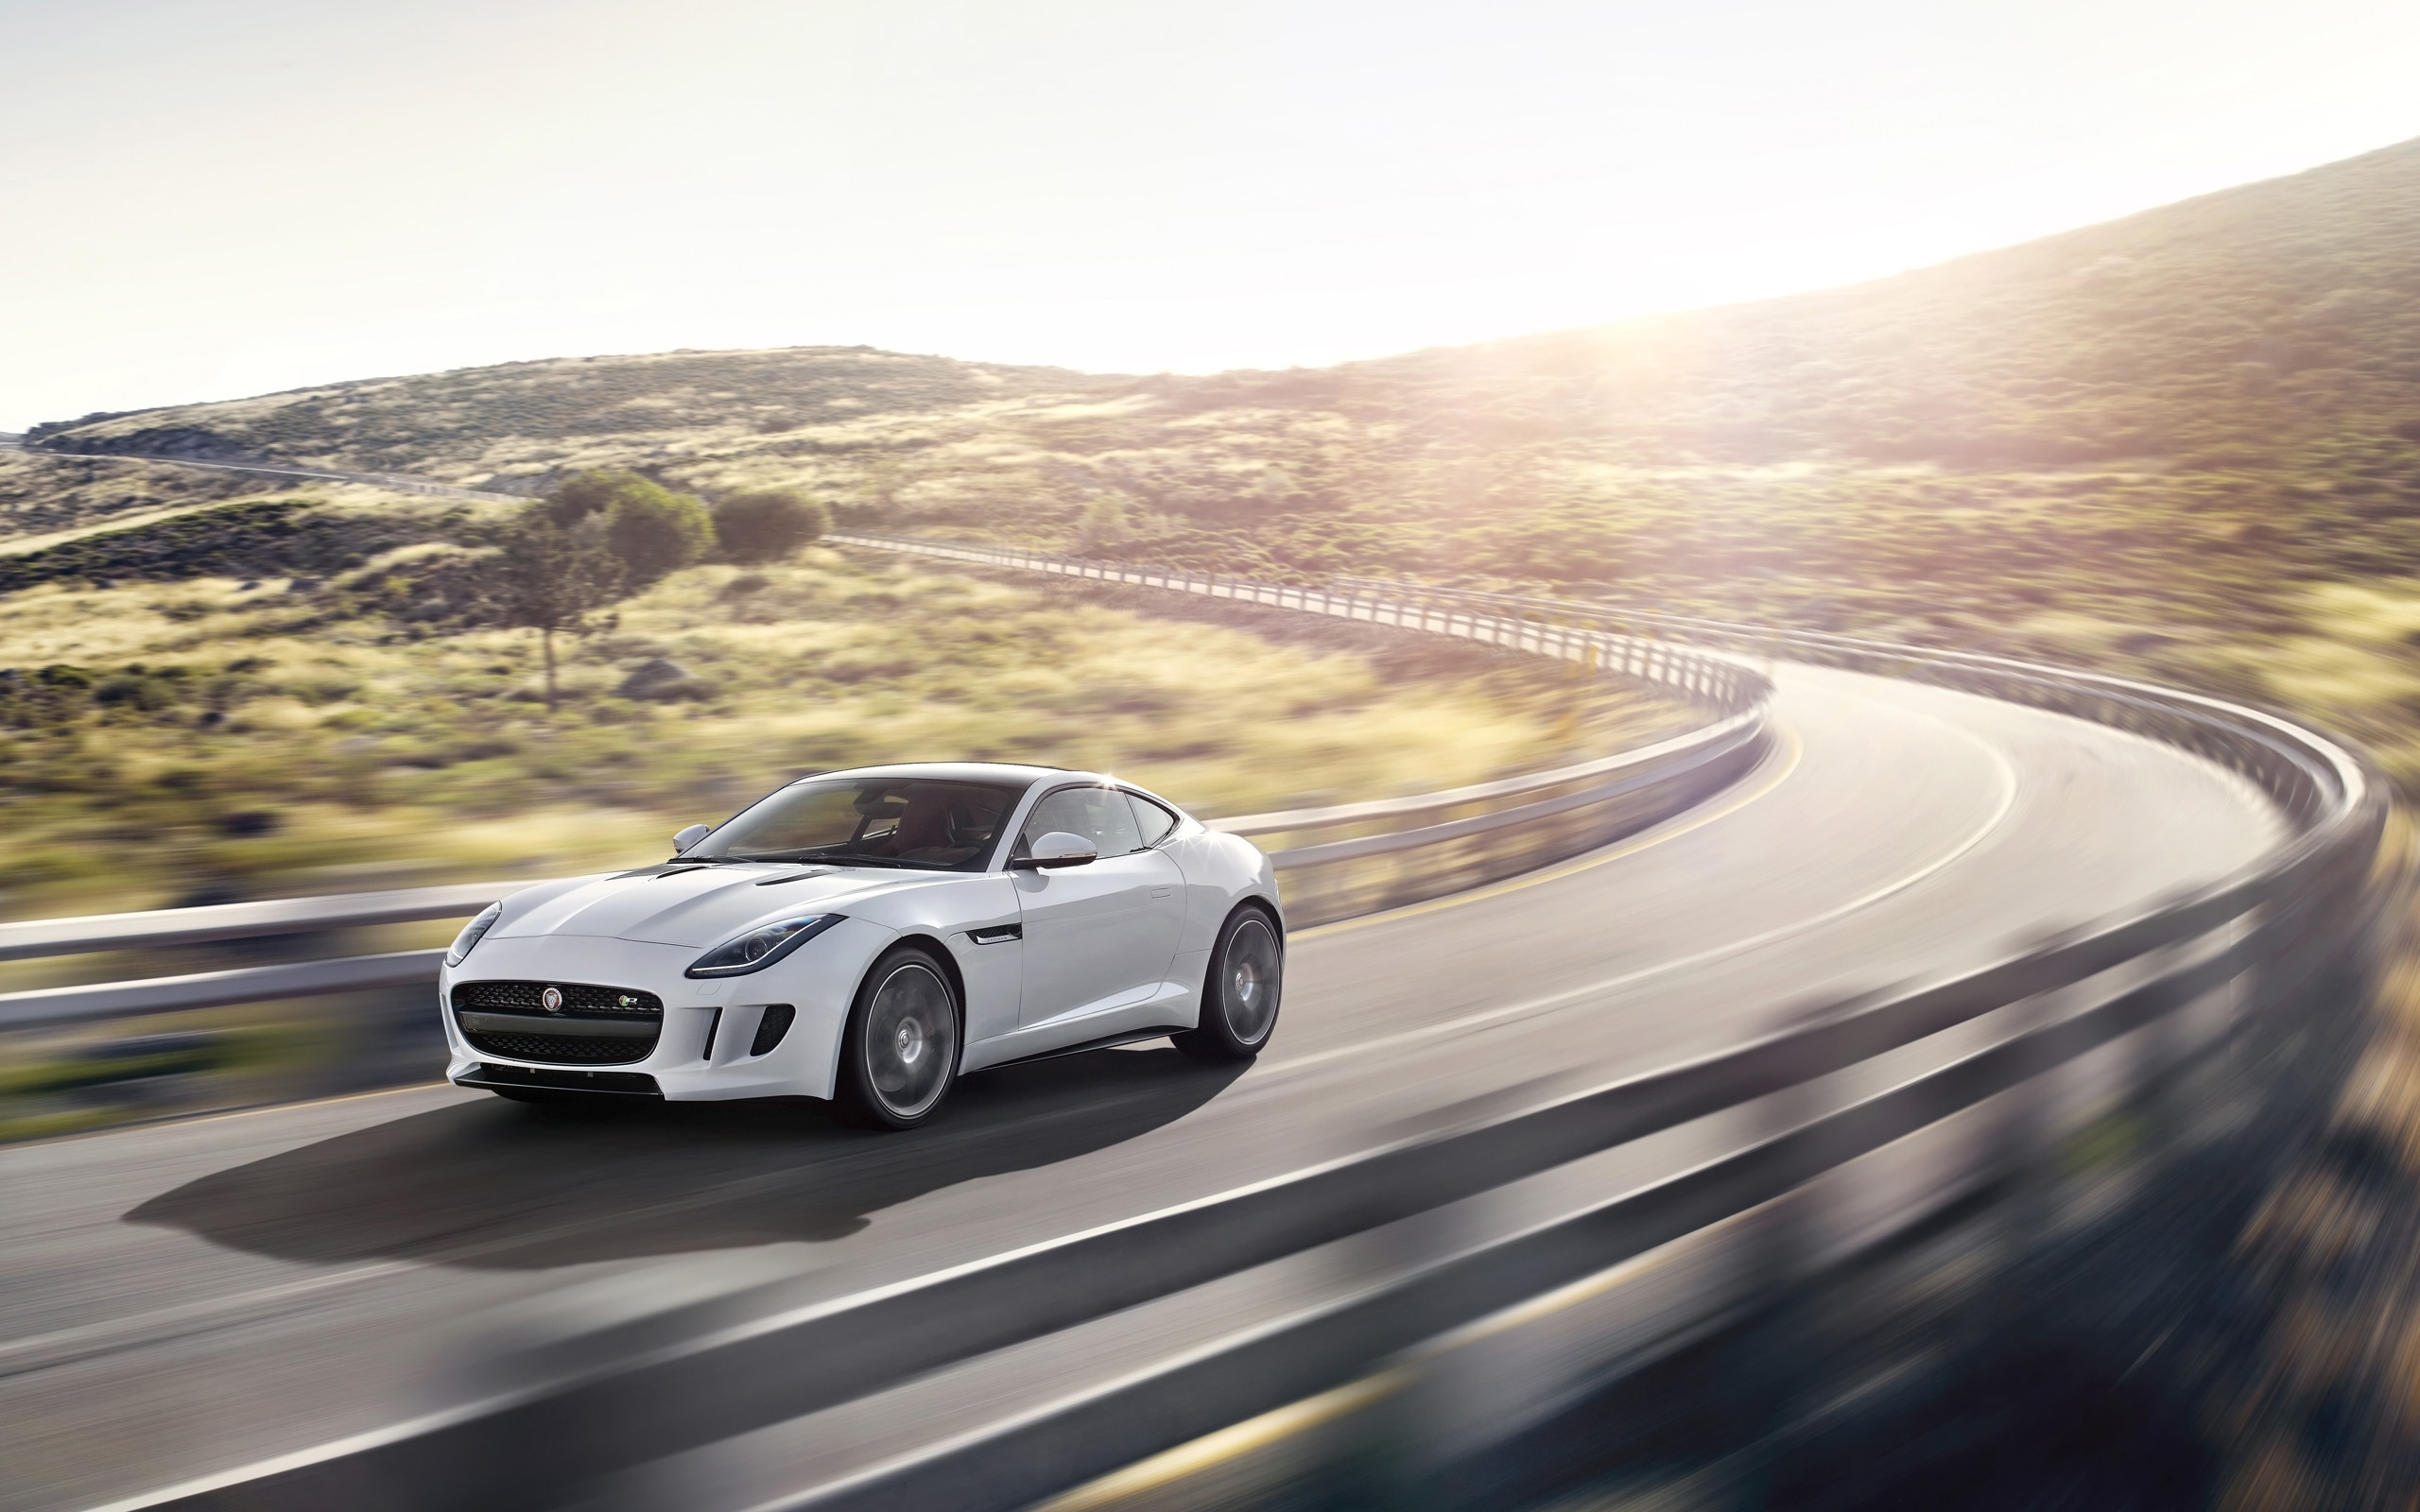 Free Download 2014 Jaguar F Type R Coupe 5 Wallpaper Hd Car Wallpapers Id 4130 2560x1600 For Your Desktop Mobile Tablet Explore 33 Jaguar F Type R Wallpapers Jaguar F Type